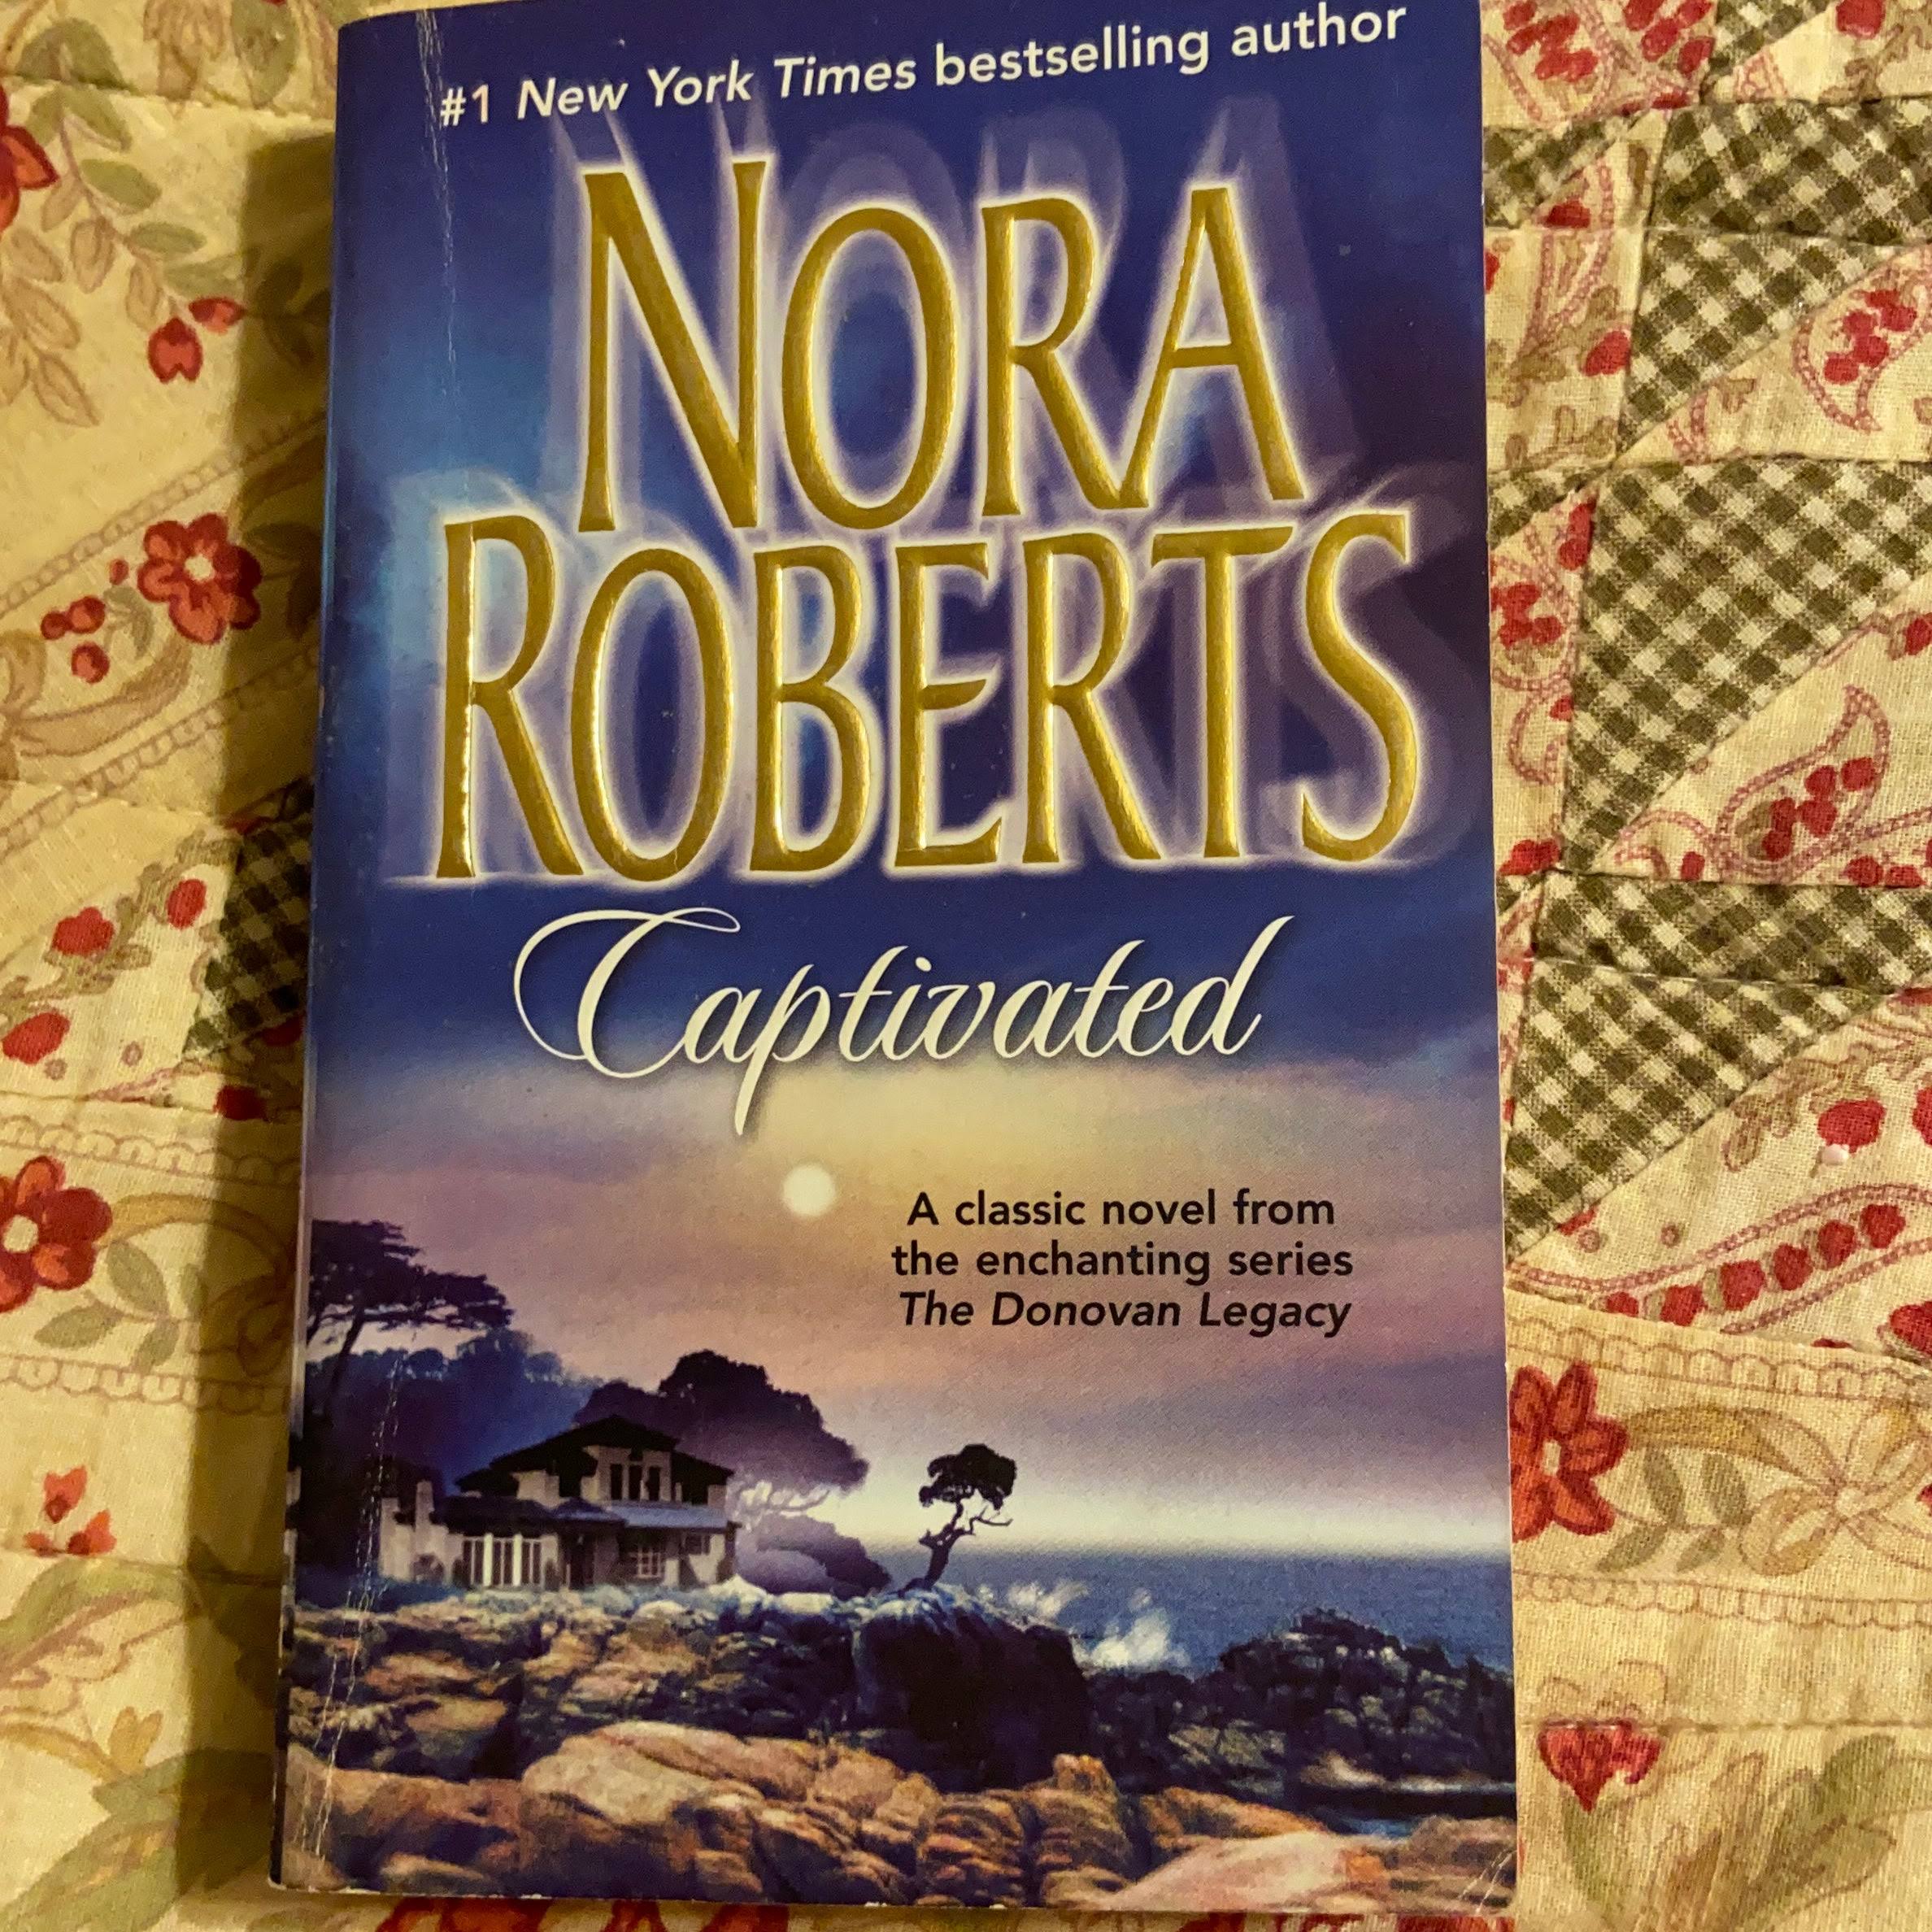 Captivated by Nora Roberts